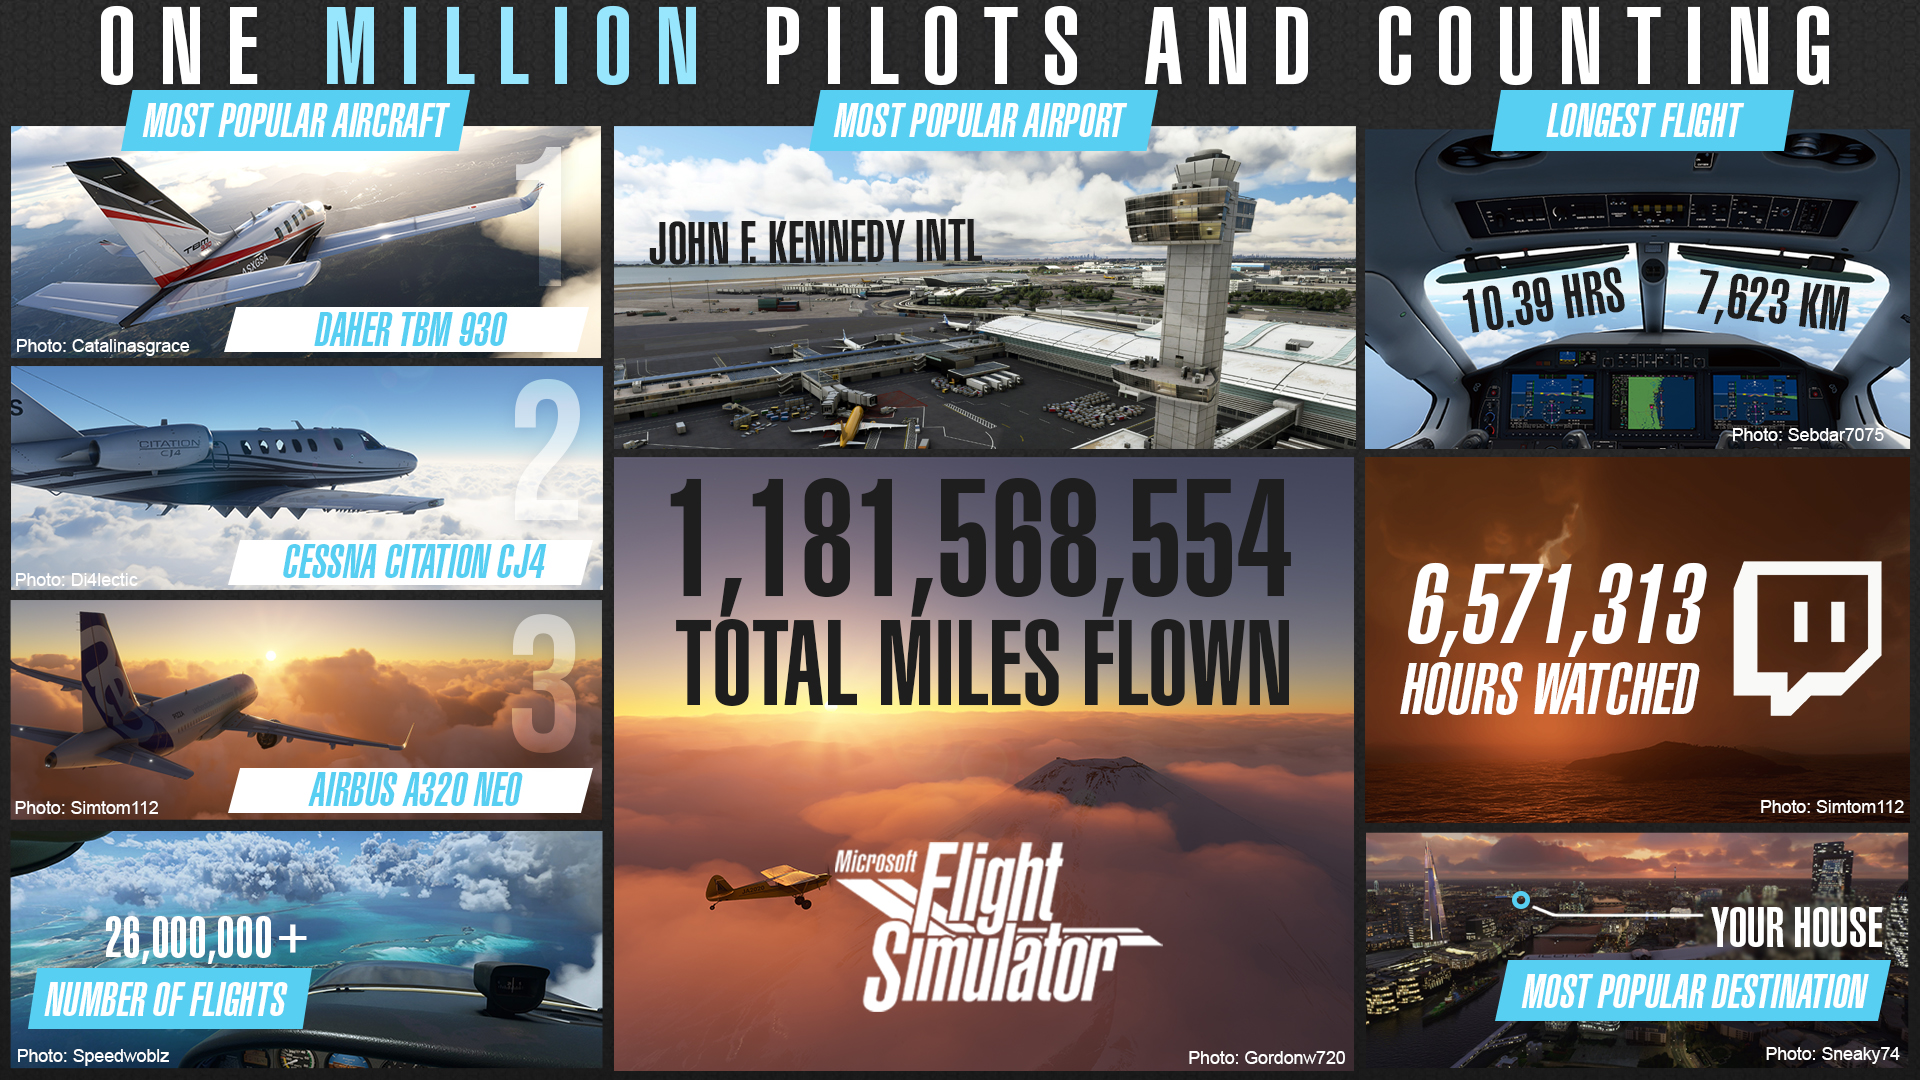 Microsoft Flight Simulator Is The Biggest Game Launch In Xbox Game Pass For Pc History With Over 1 Million Players To Date Xbox Wire